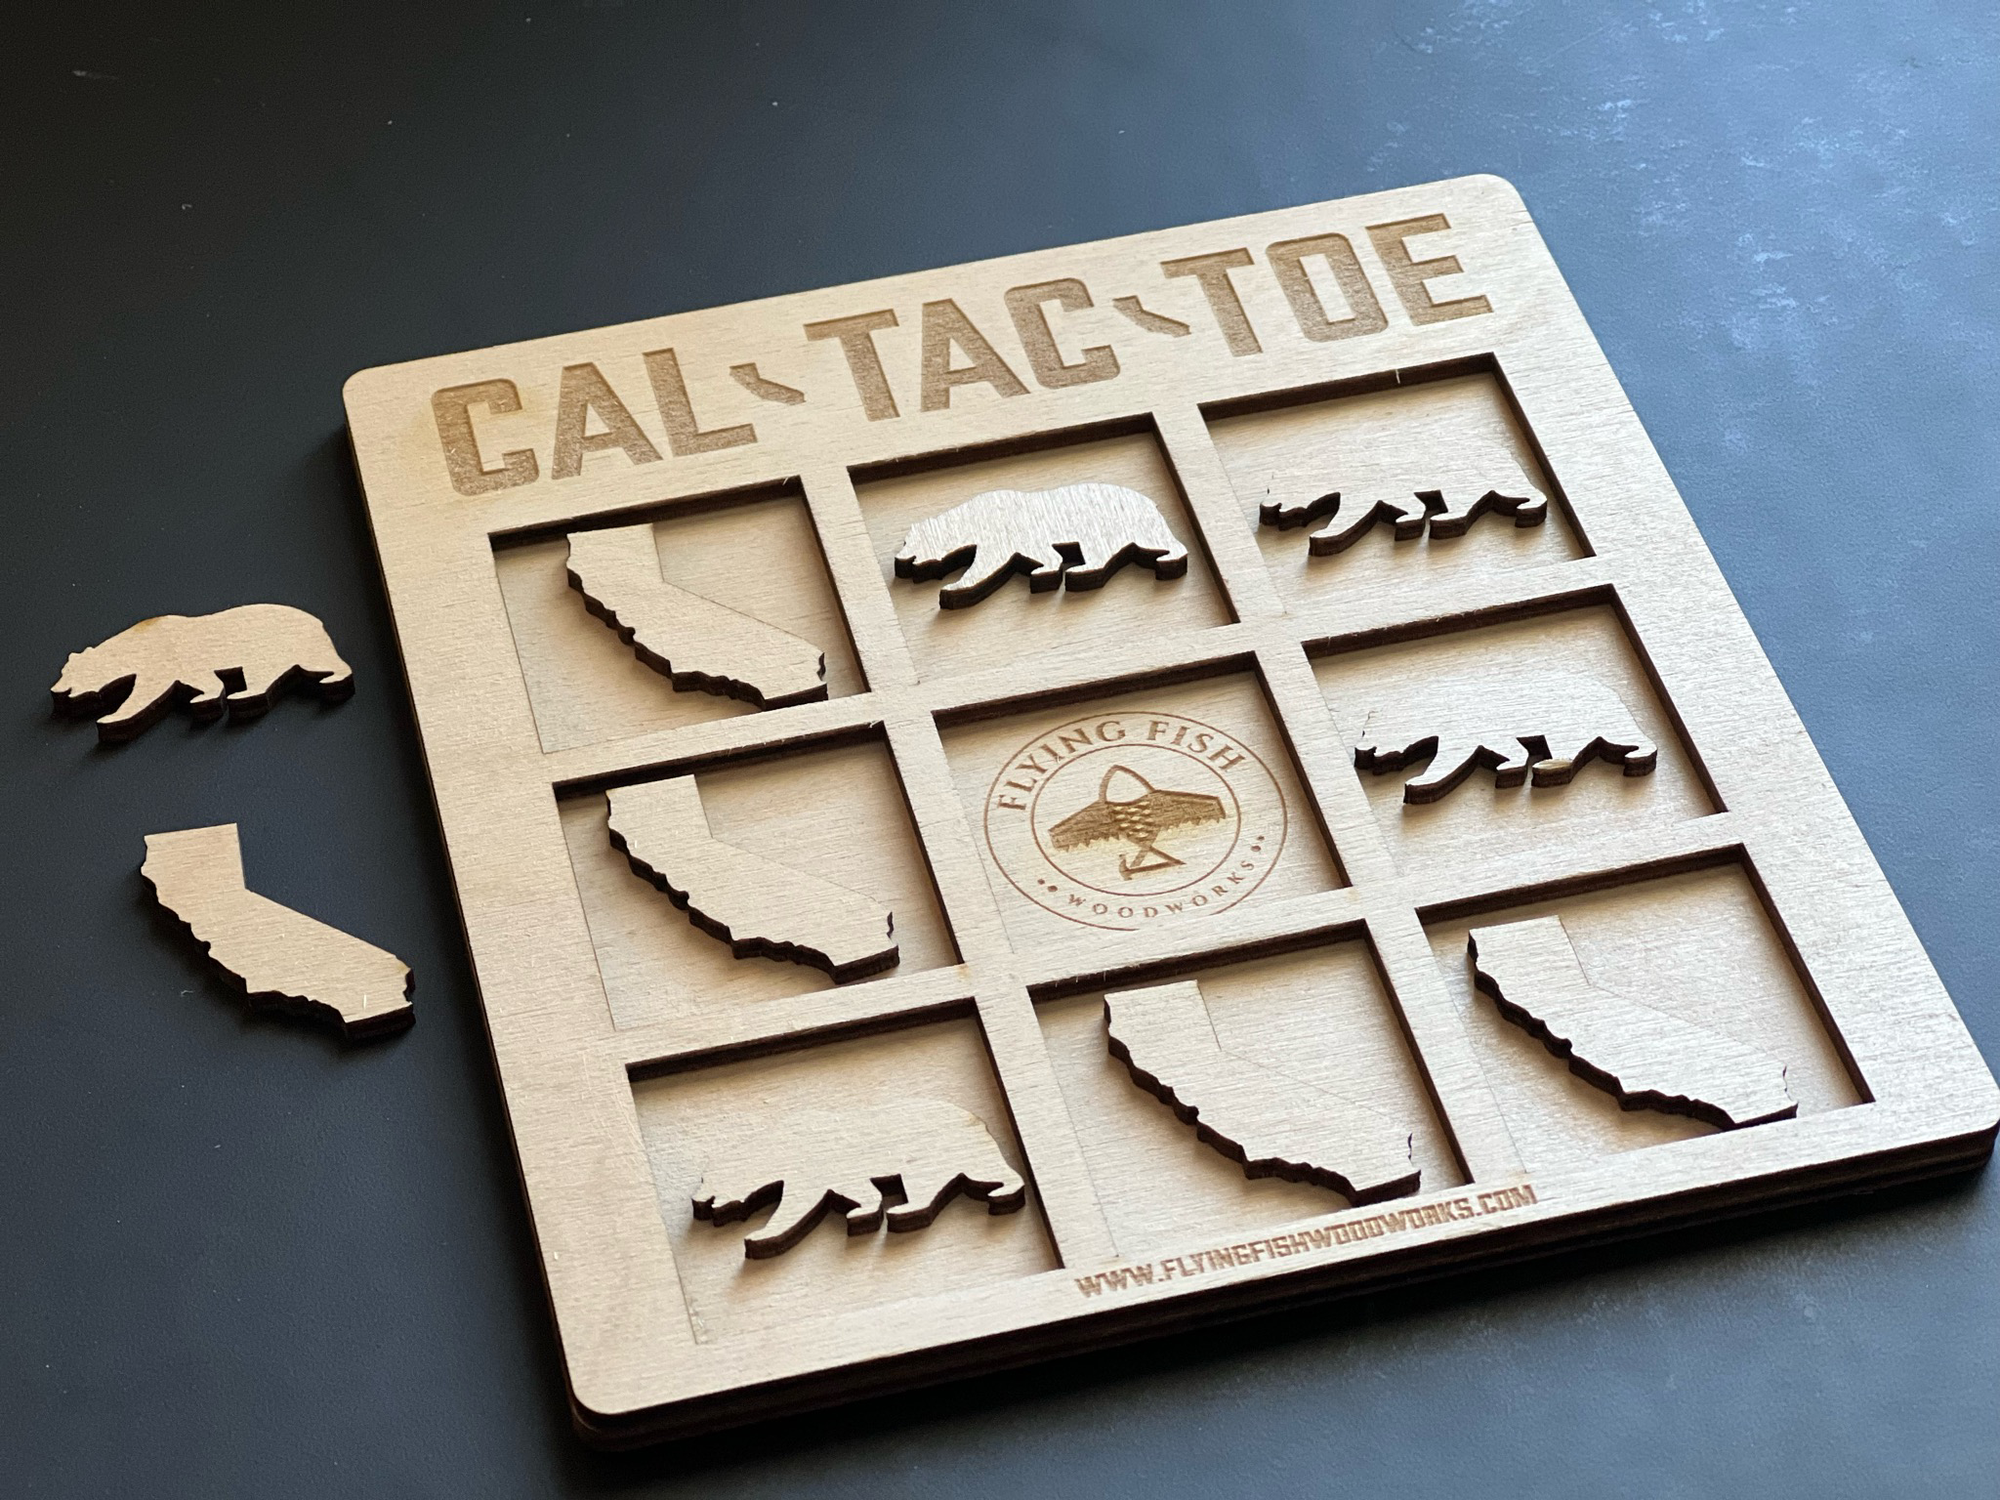 Make Your Own Custom Themed Tic-Tac-Toe Game!